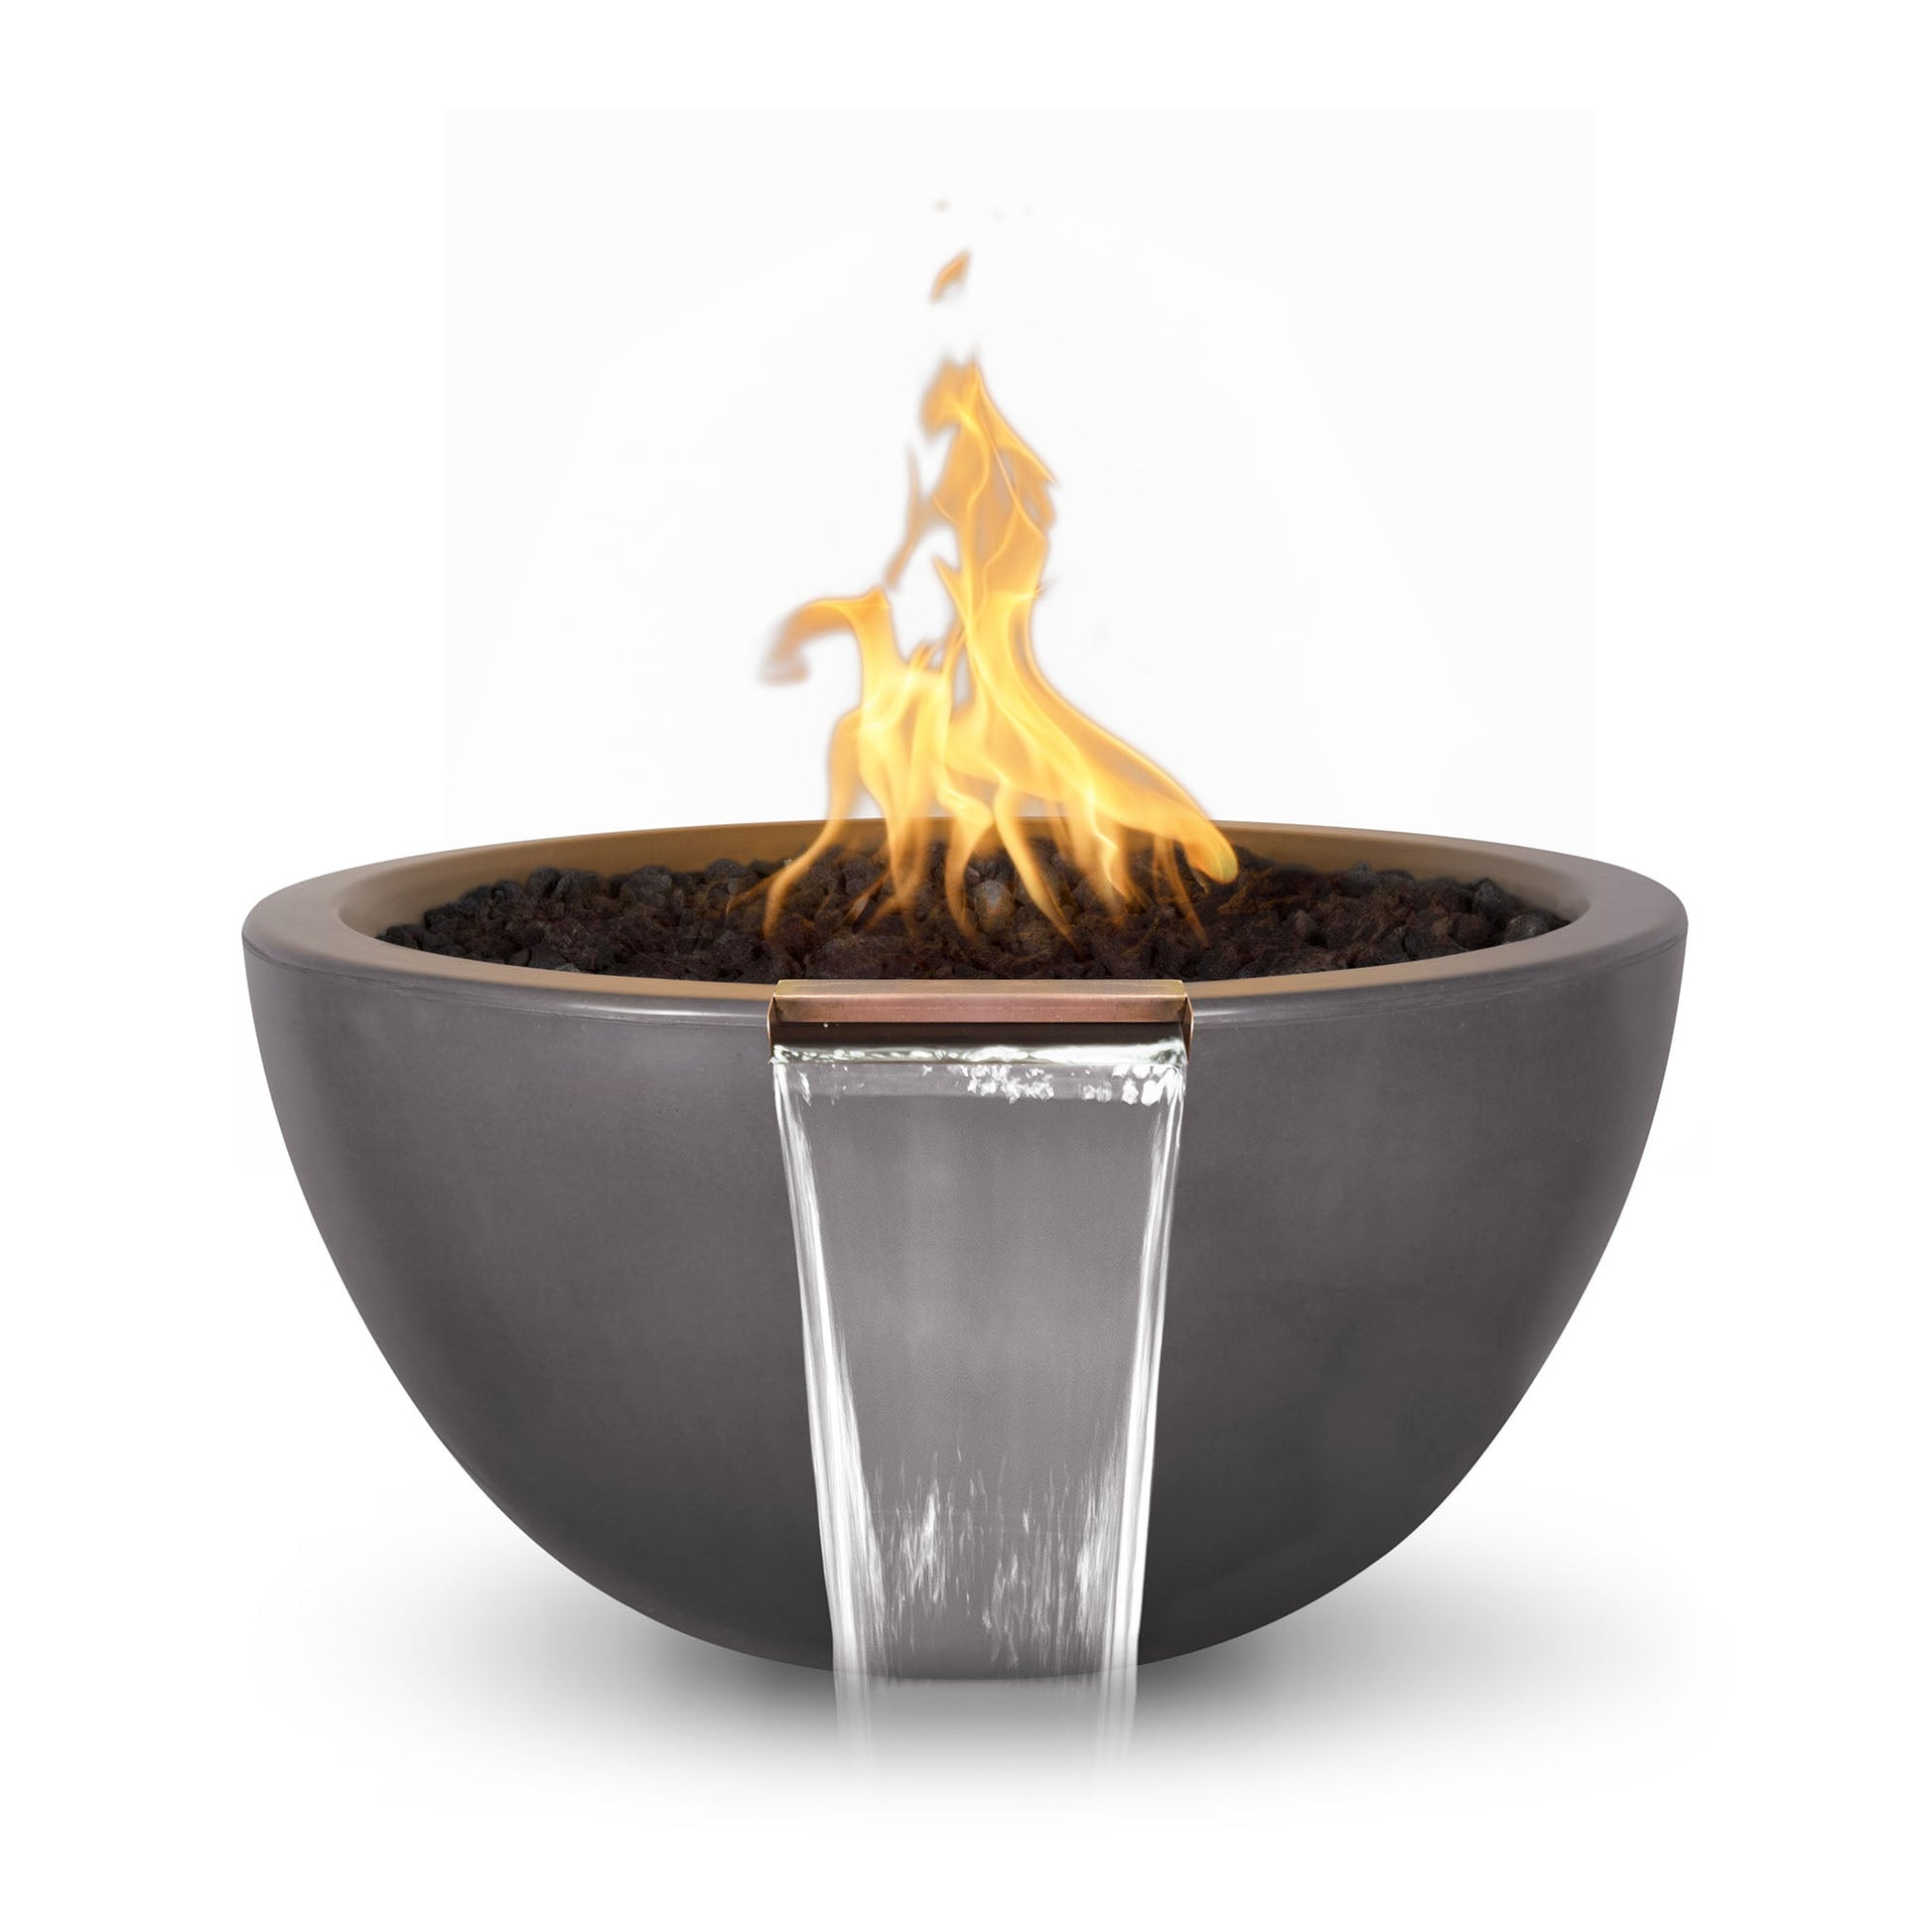 The Outdoor Plus Round Luna 30" White GFRC Concrete Natural Gas Fire & Water Bowl with Match Lit with Flame Sense Ignition